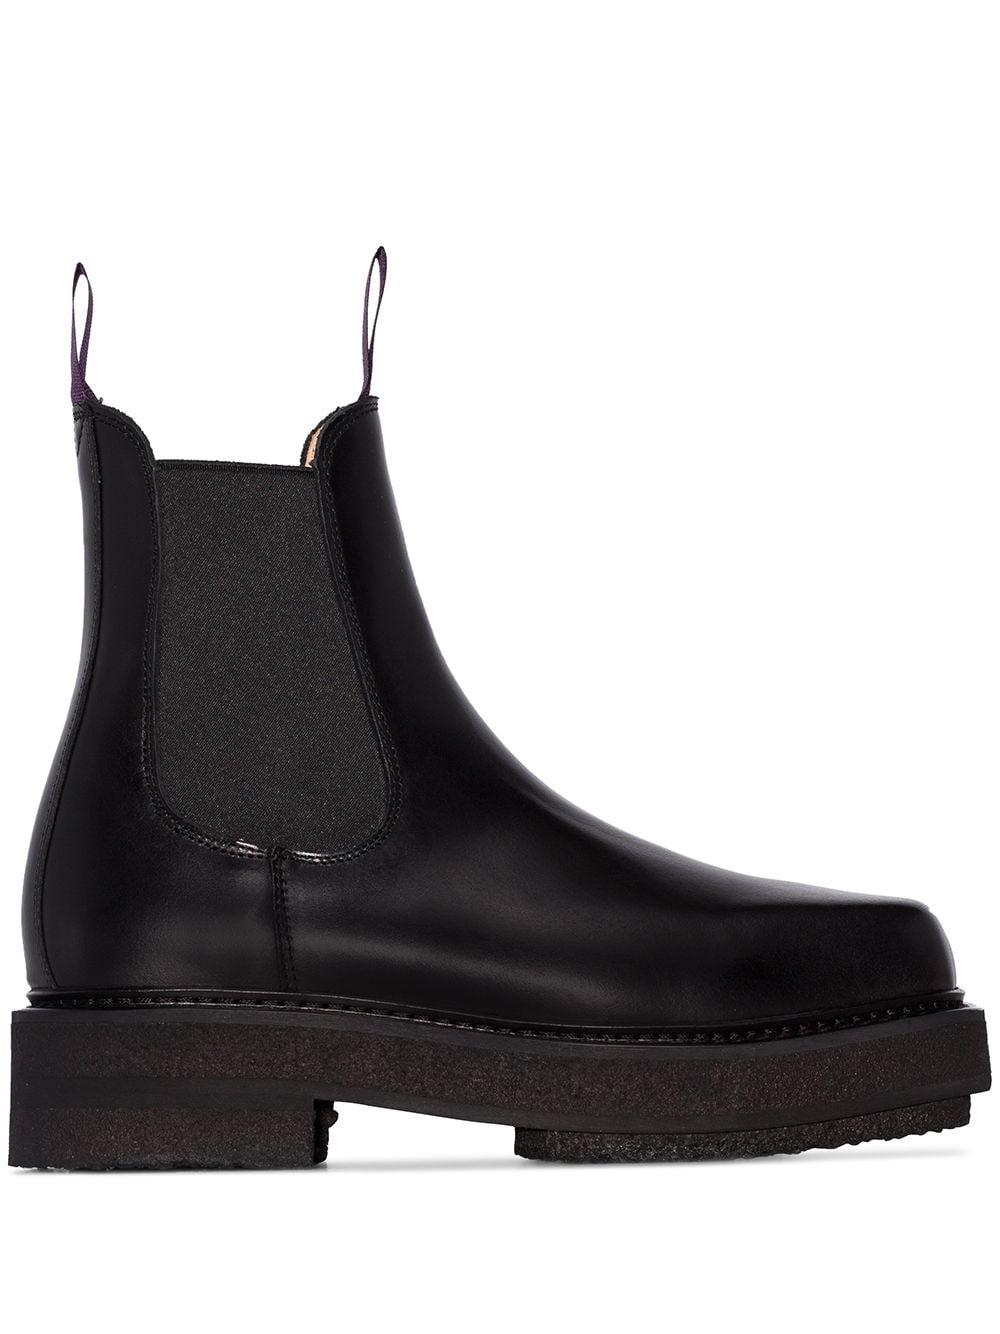 Eytys Leather Ortega Chelsea Boots in Black | Lyst